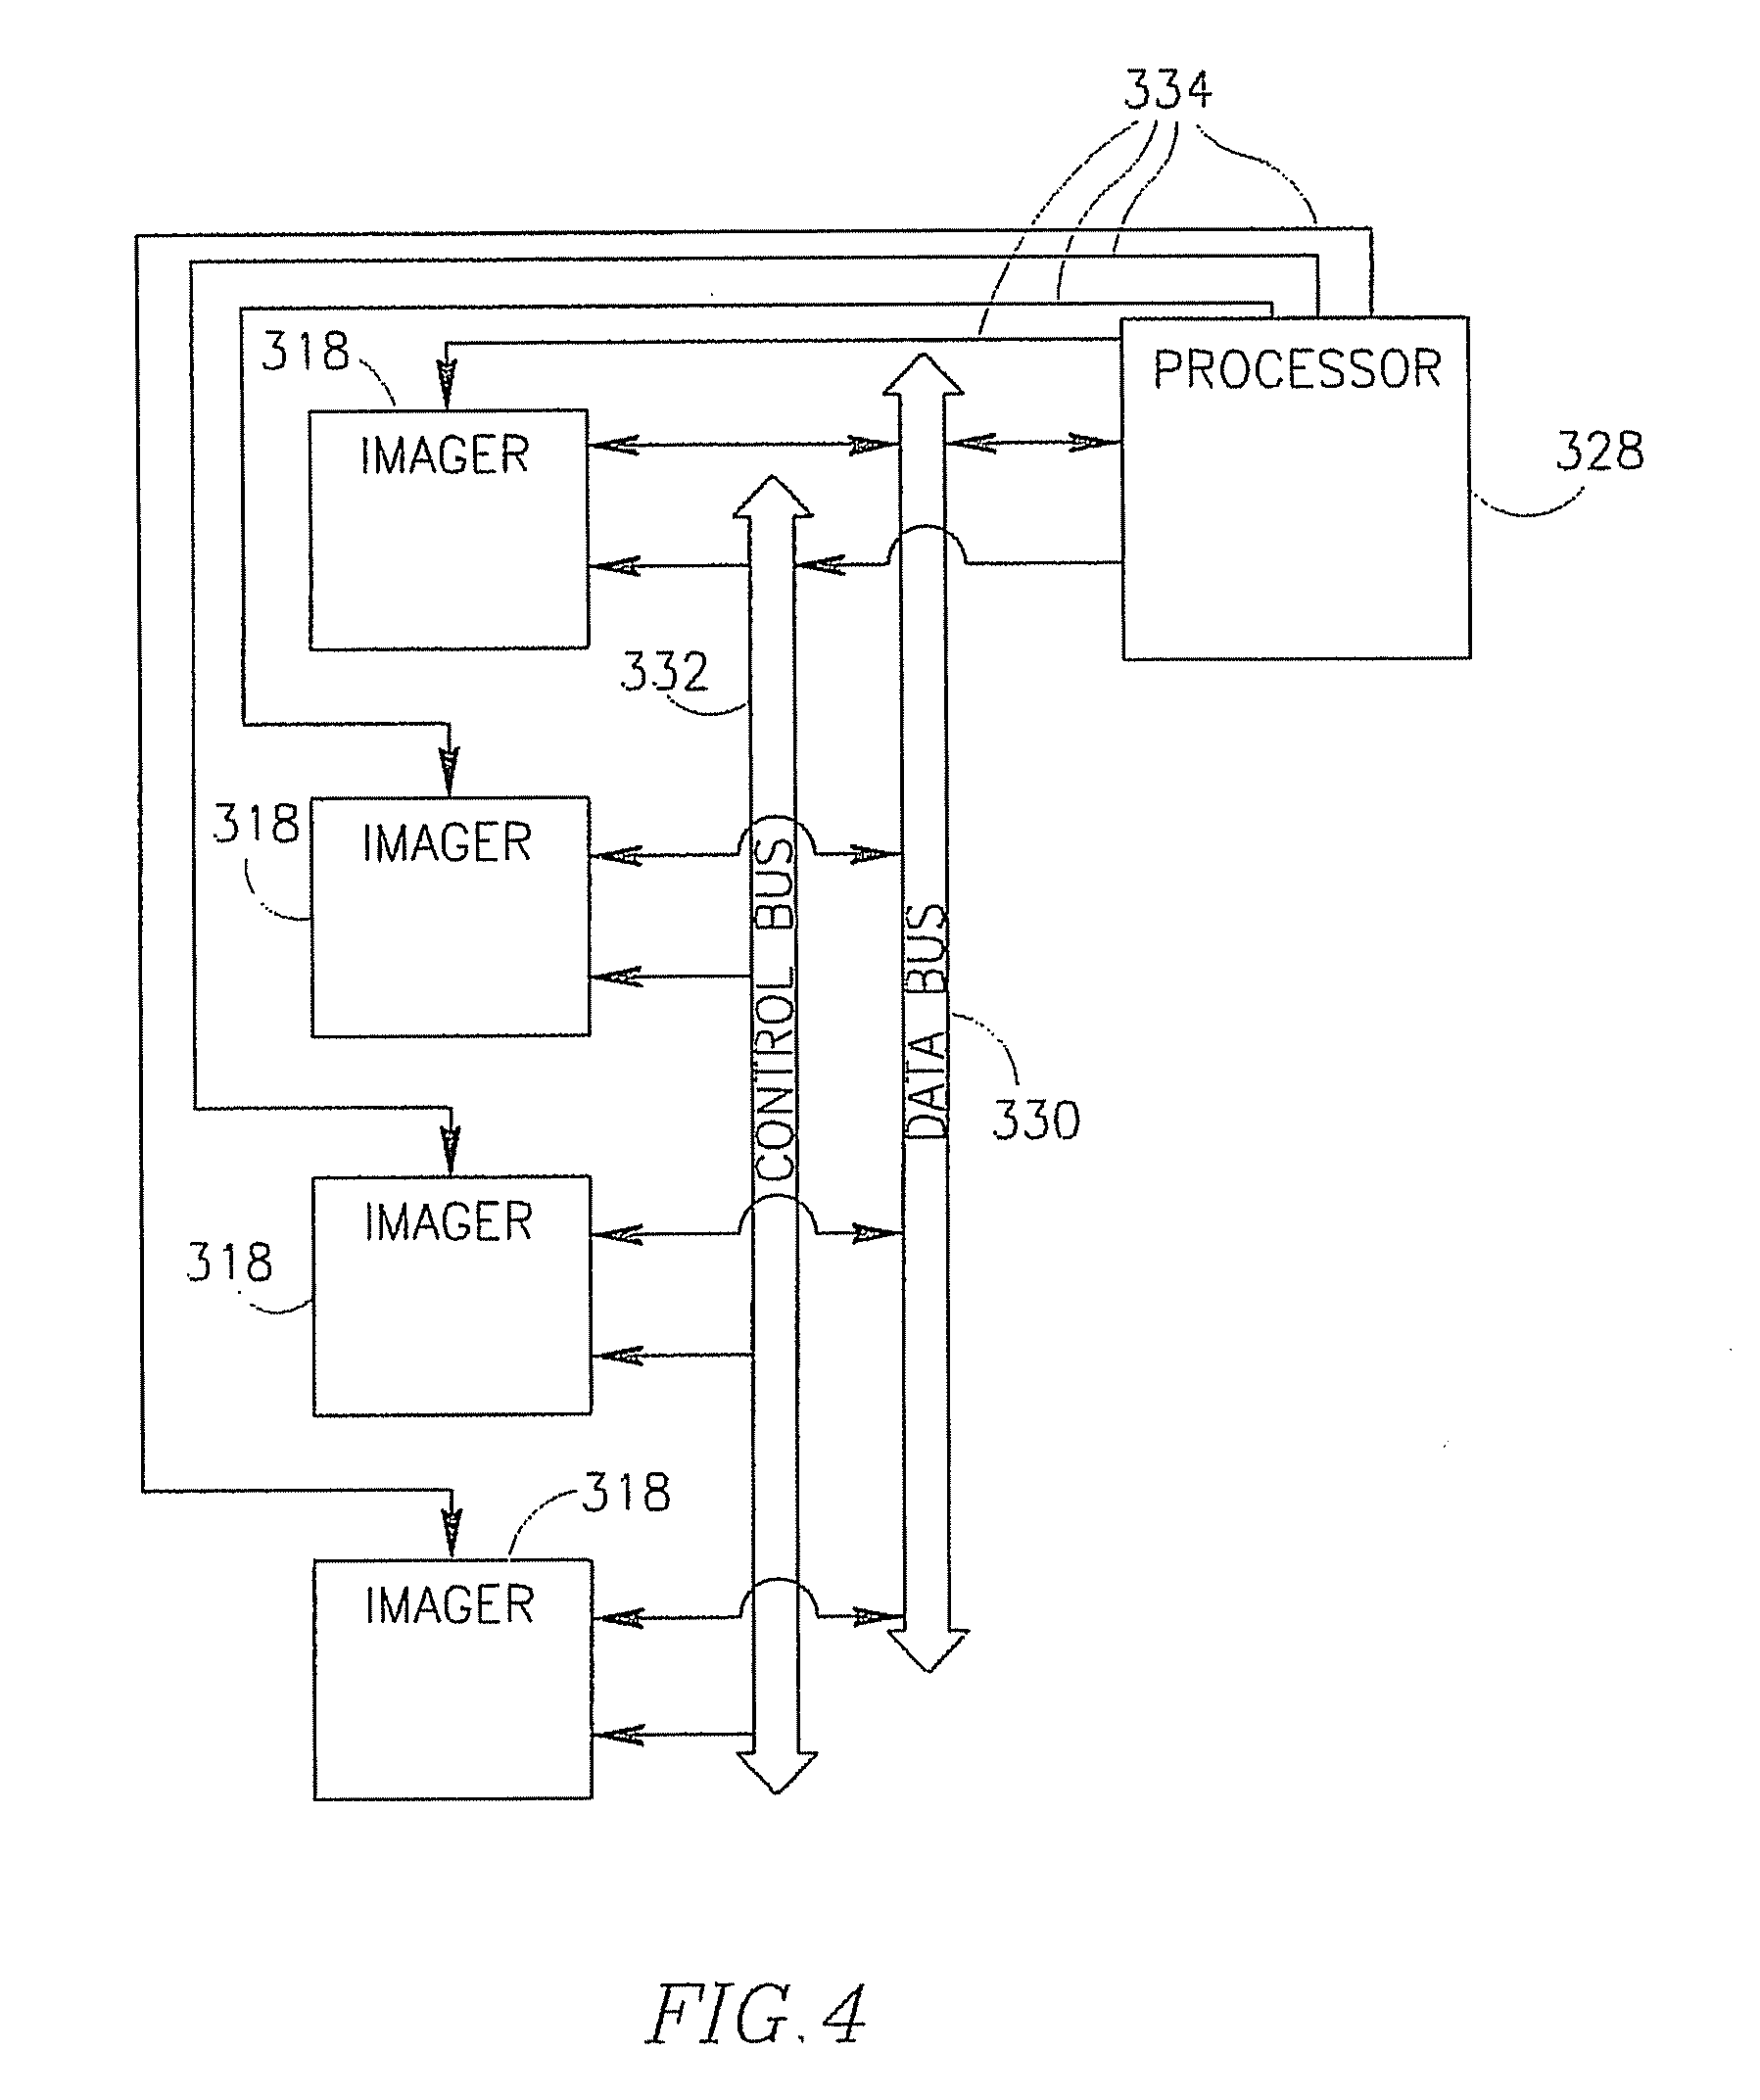 In-vivo sensing device and method for communicating between imagers and processor thereof